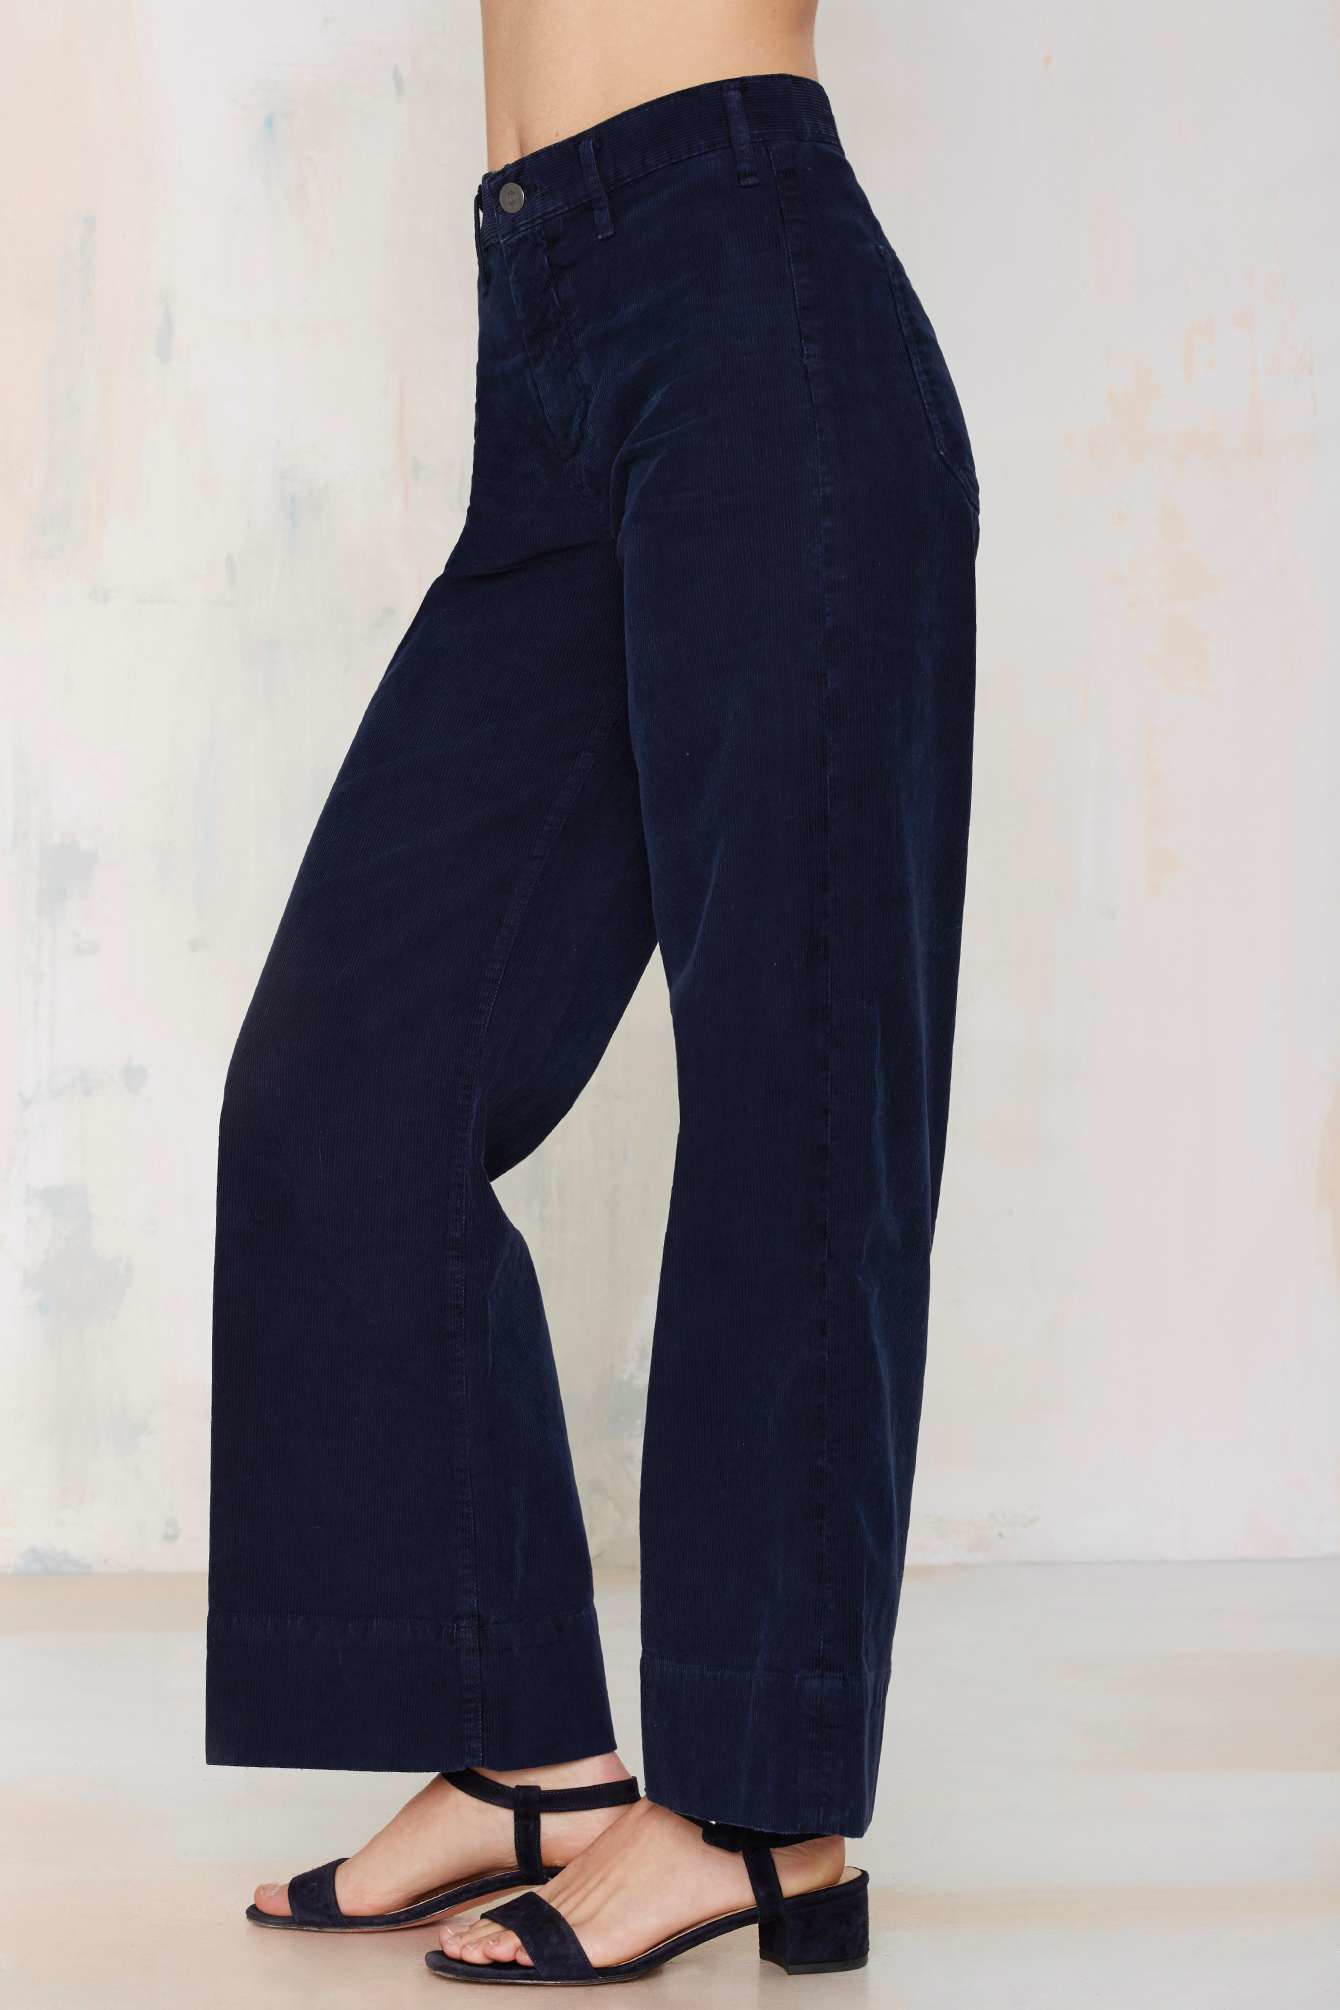 Citizens of humanity Abigail Wide Leg Corduroy Pants in Blue | Lyst